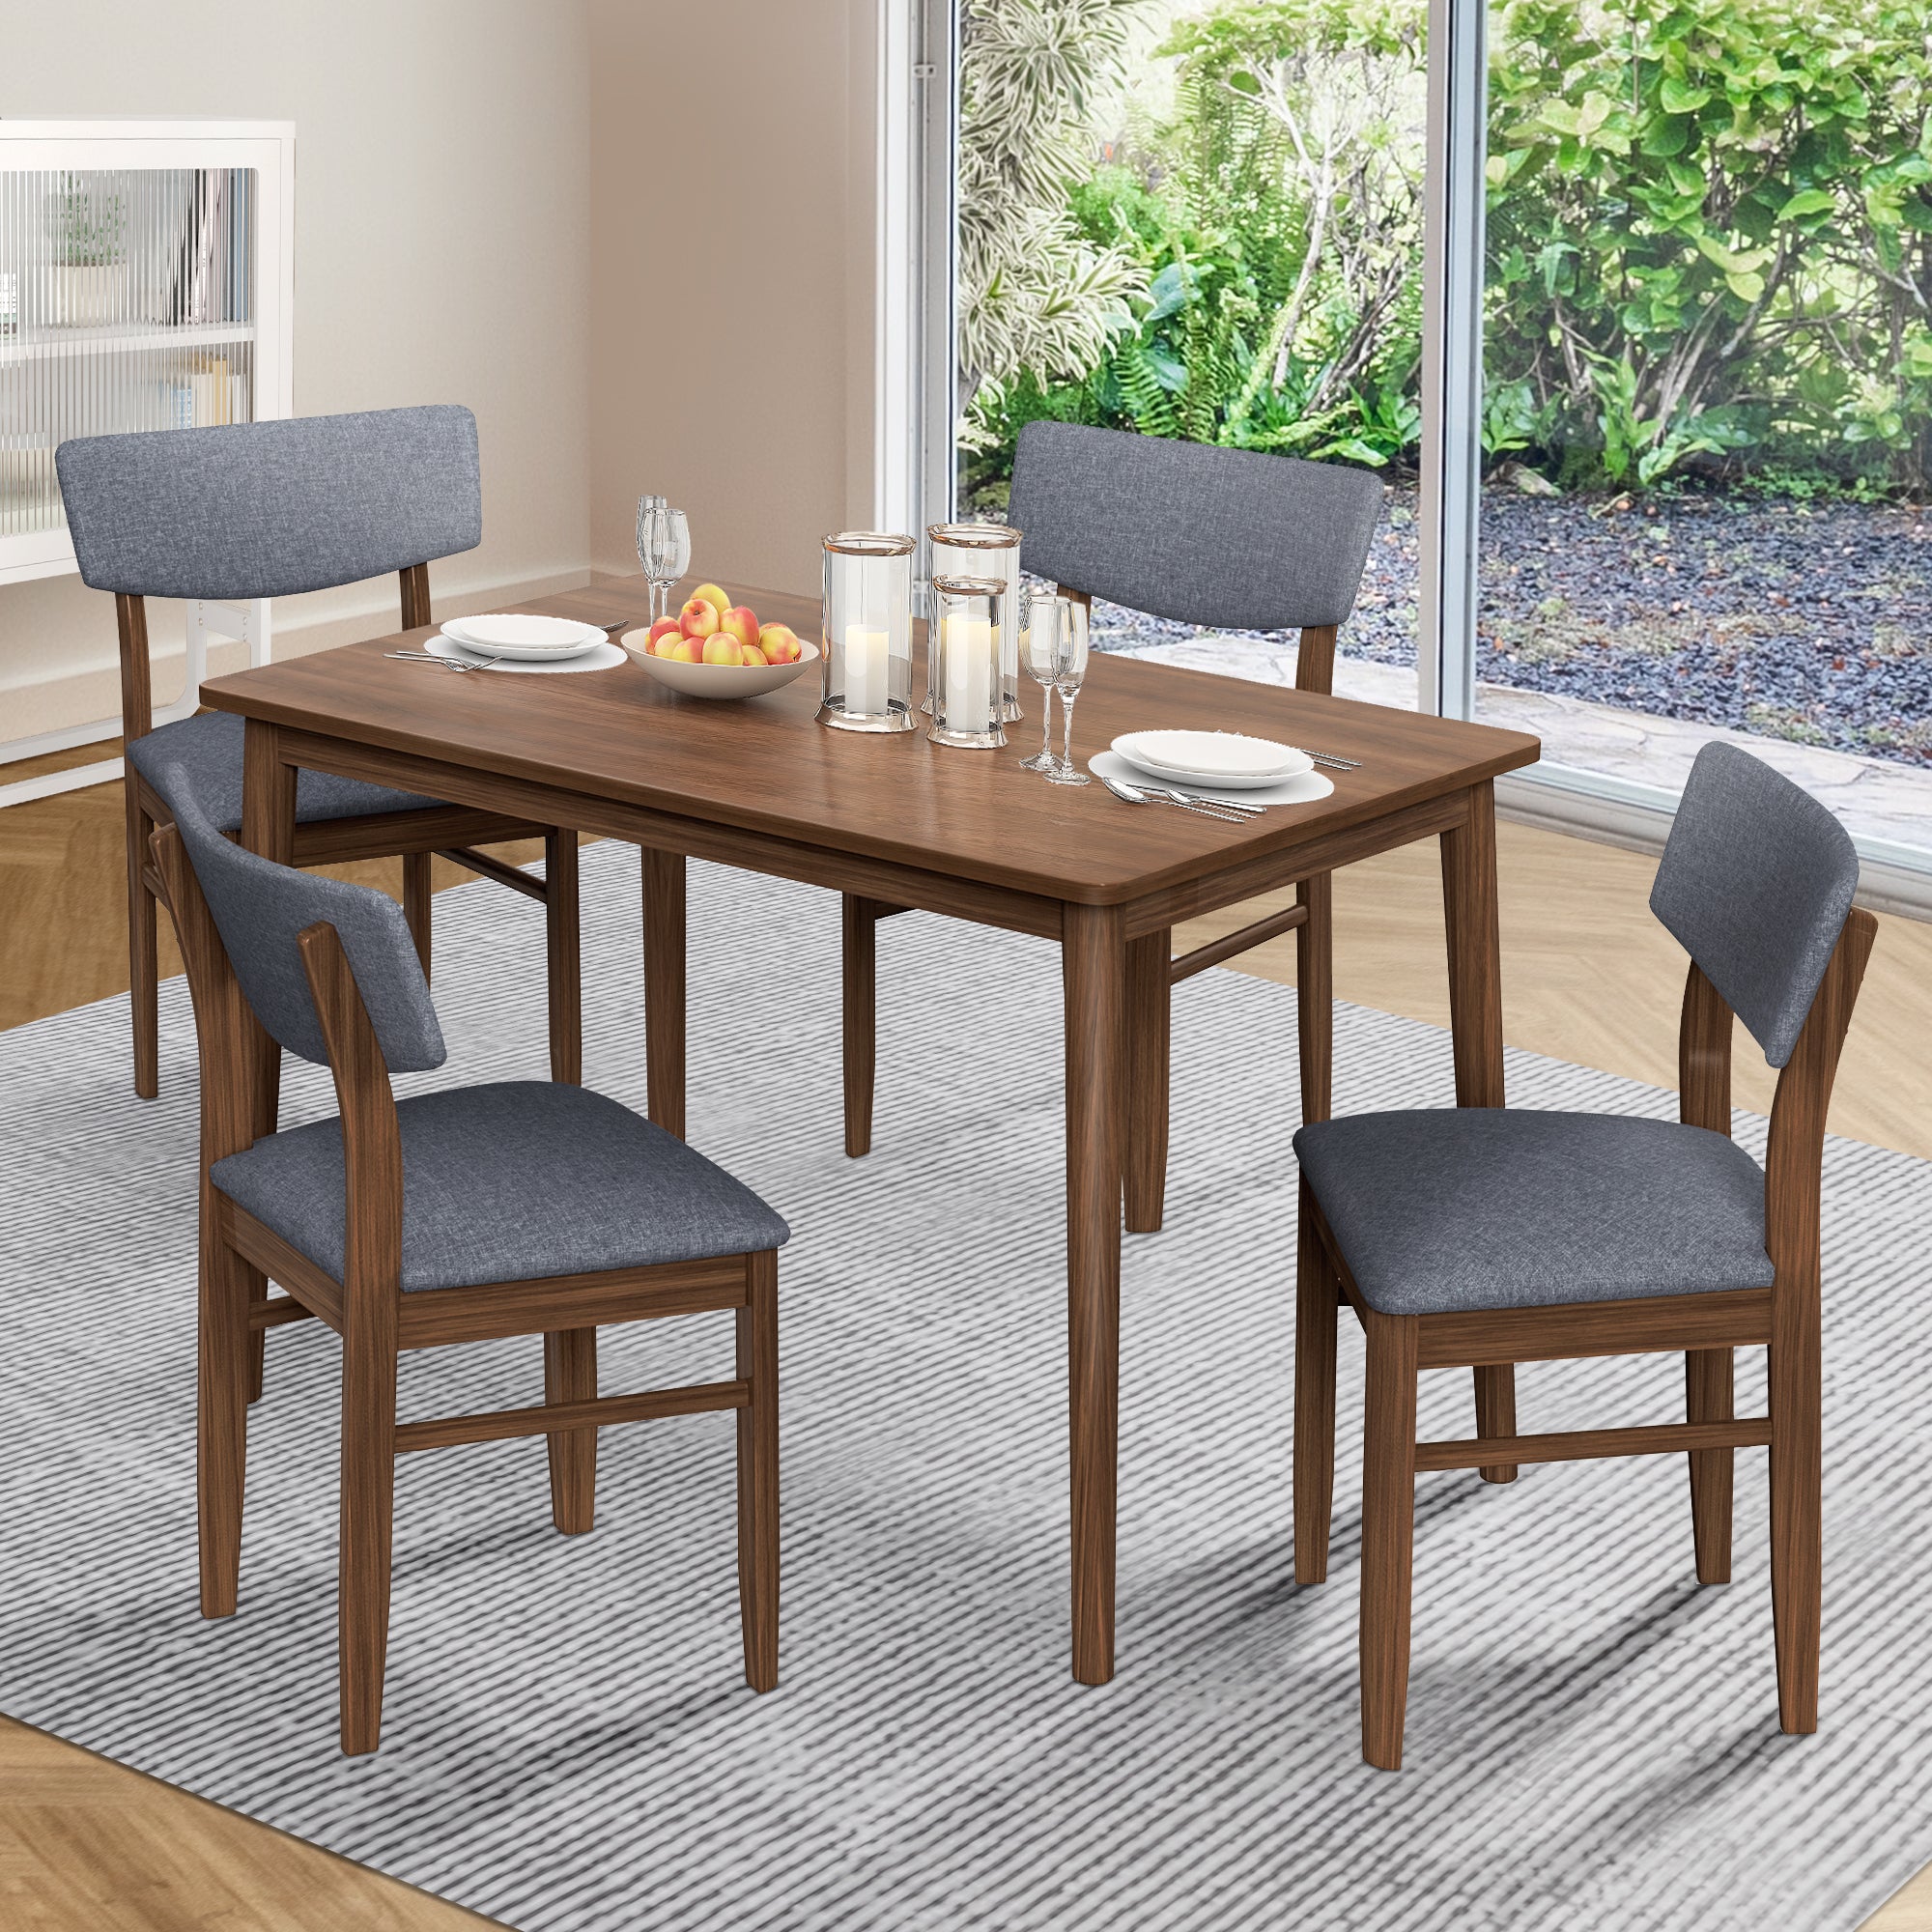 5 Piece Modern Rubberwood Kitchen & Dining Furniture Set with 1 Rectangular Table and 4 Cushioned Chairs, Walnut Color + Grey